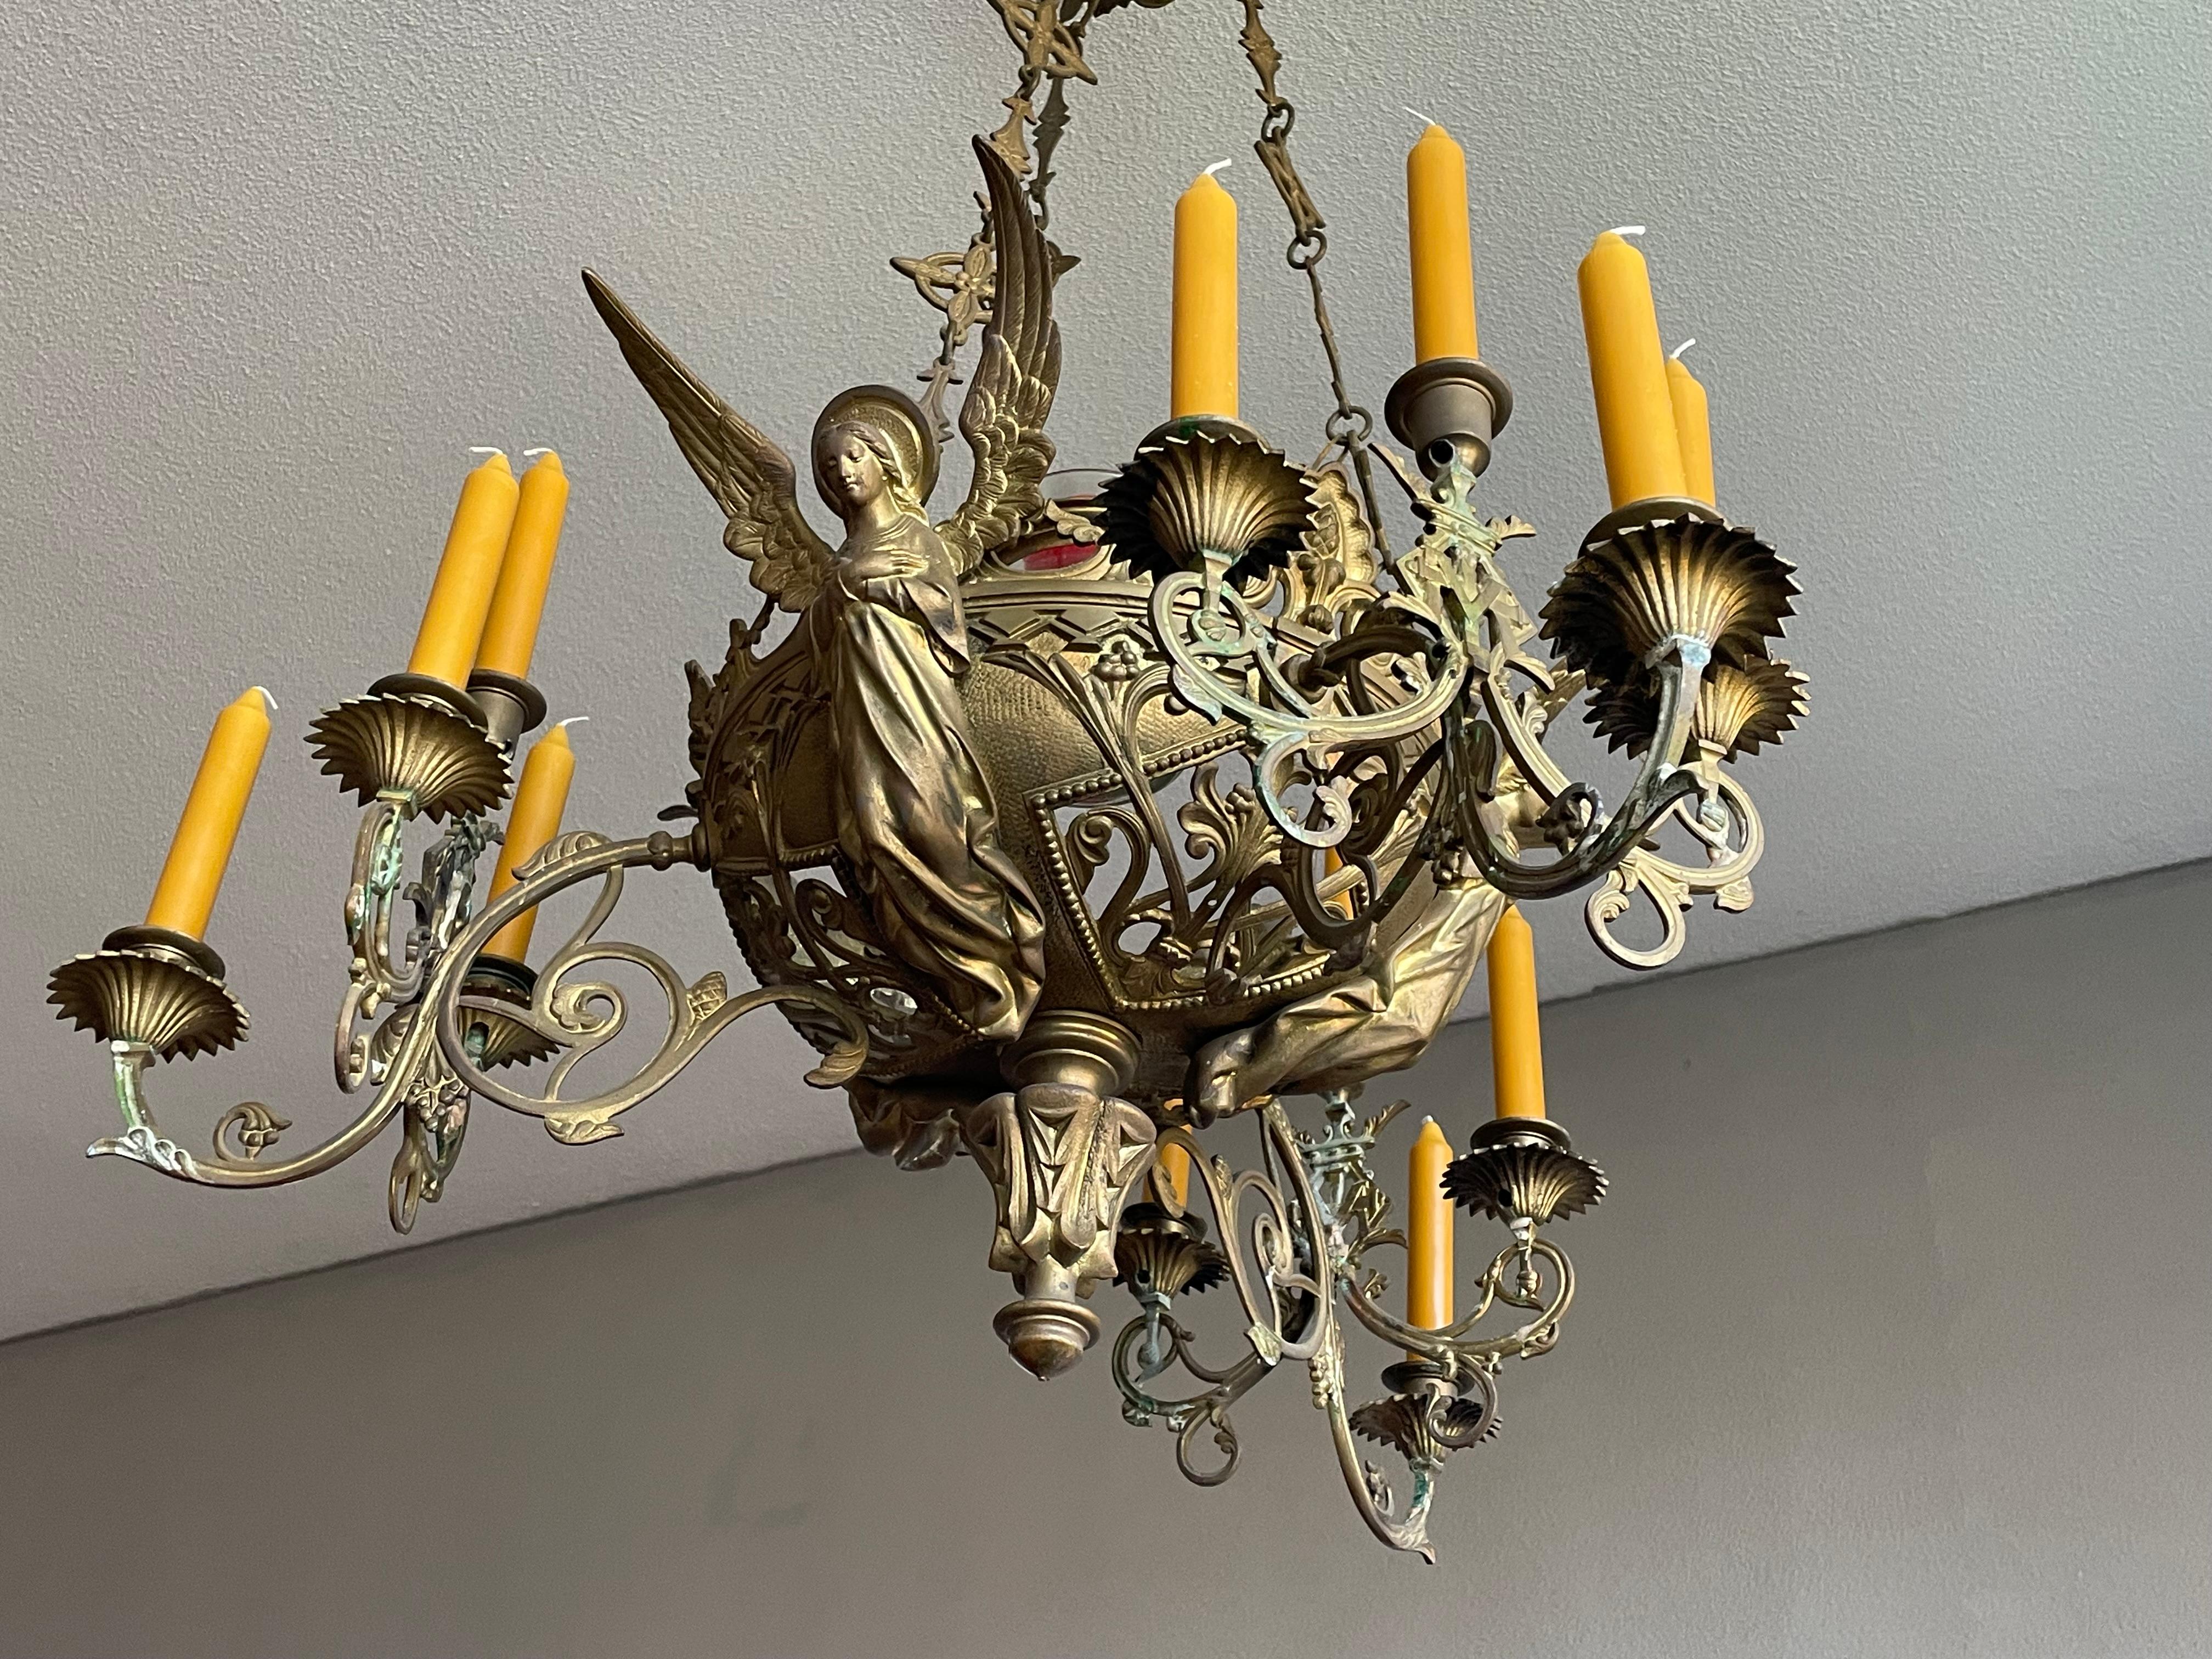 Bronze Gothic Revival Candle Chandelier w. Virgin Mary & Marian Cross Sculptures For Sale 7